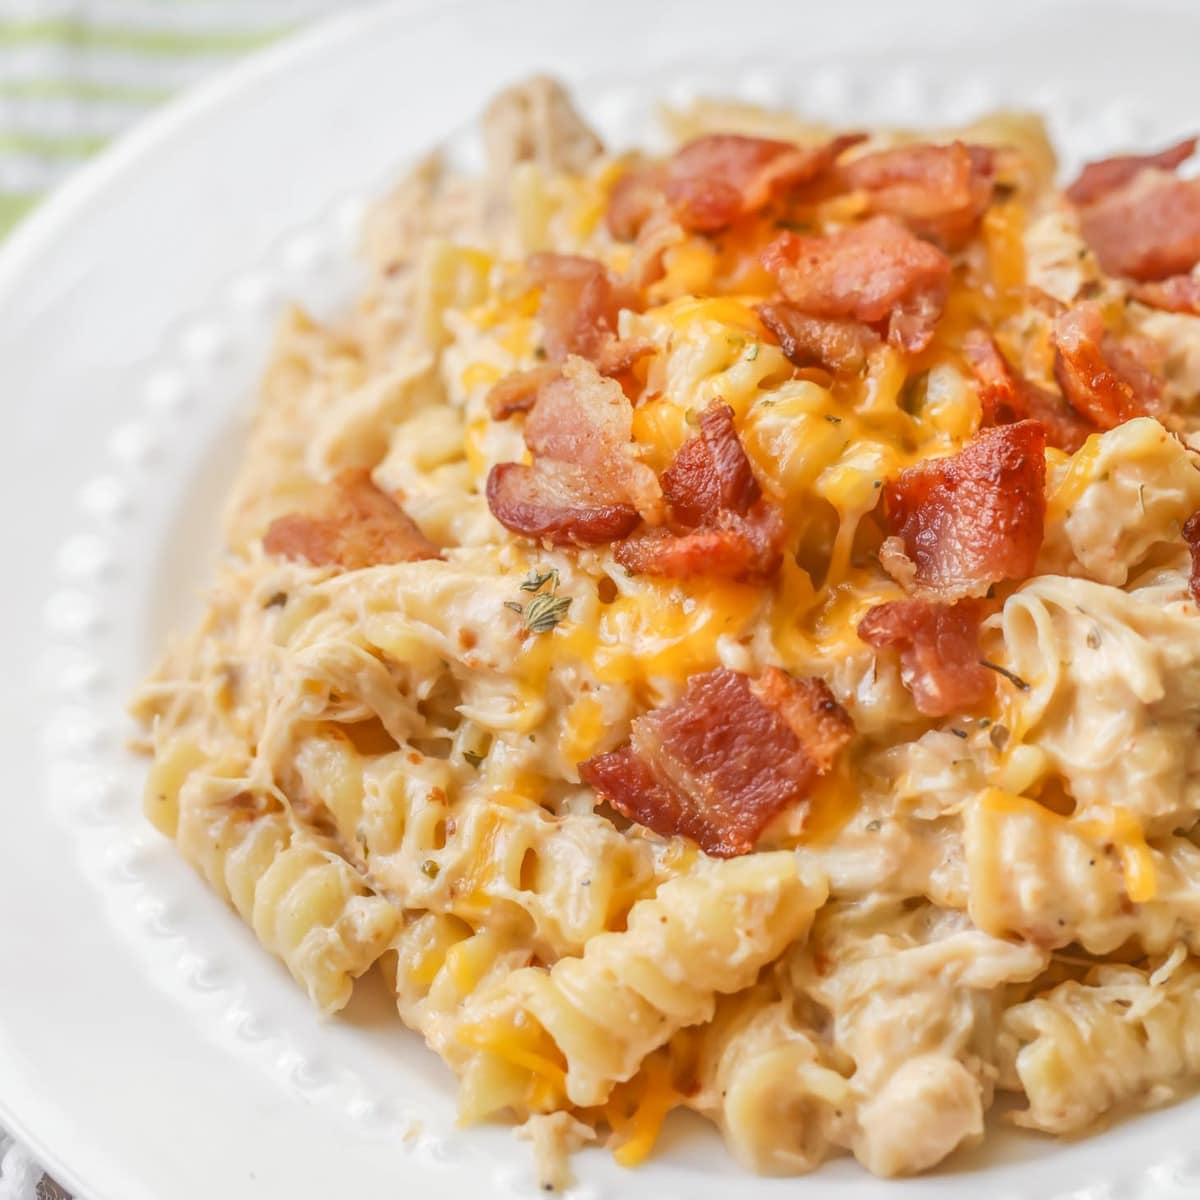 Easy Pasta Recipes - Chicken bacon ranch pasta topped with bacon crumbles.